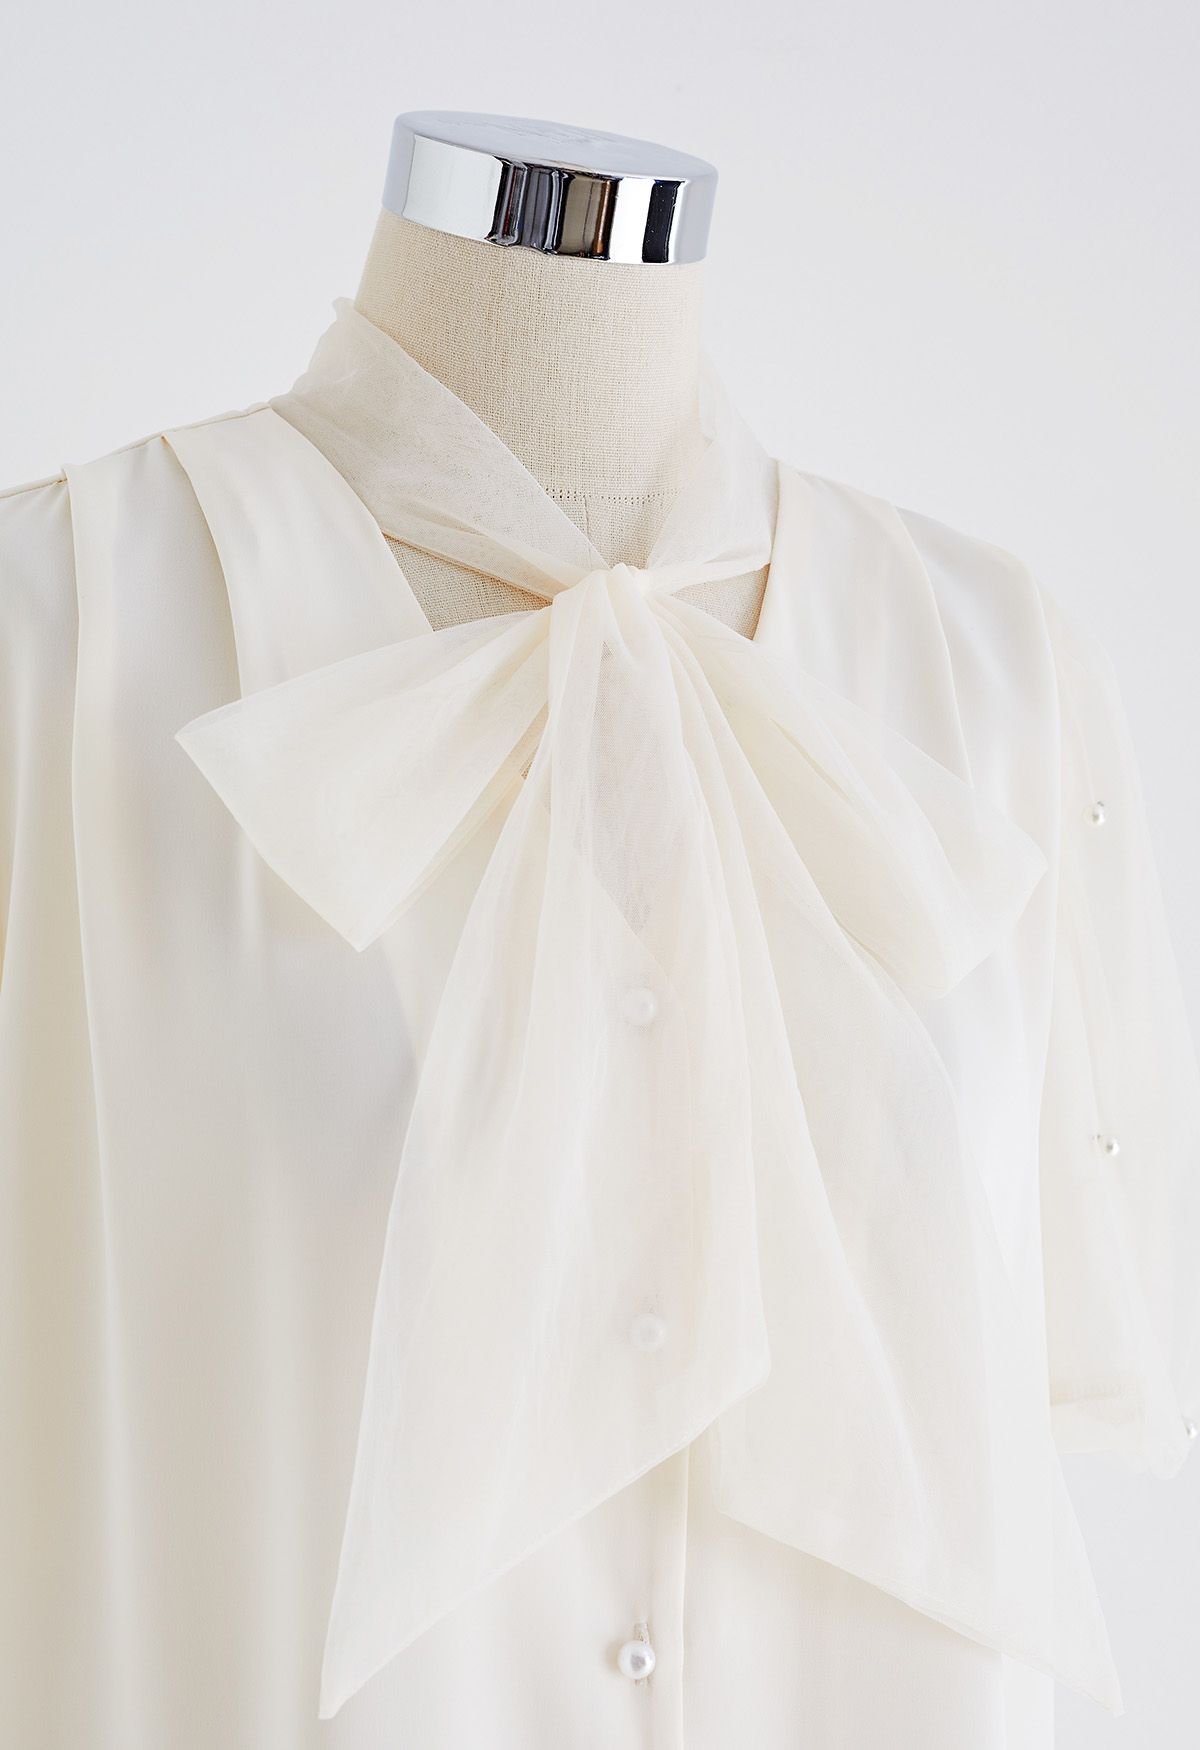 Bowknot Pearly Mesh Sleeve Spliced Satin Shirt in Cream